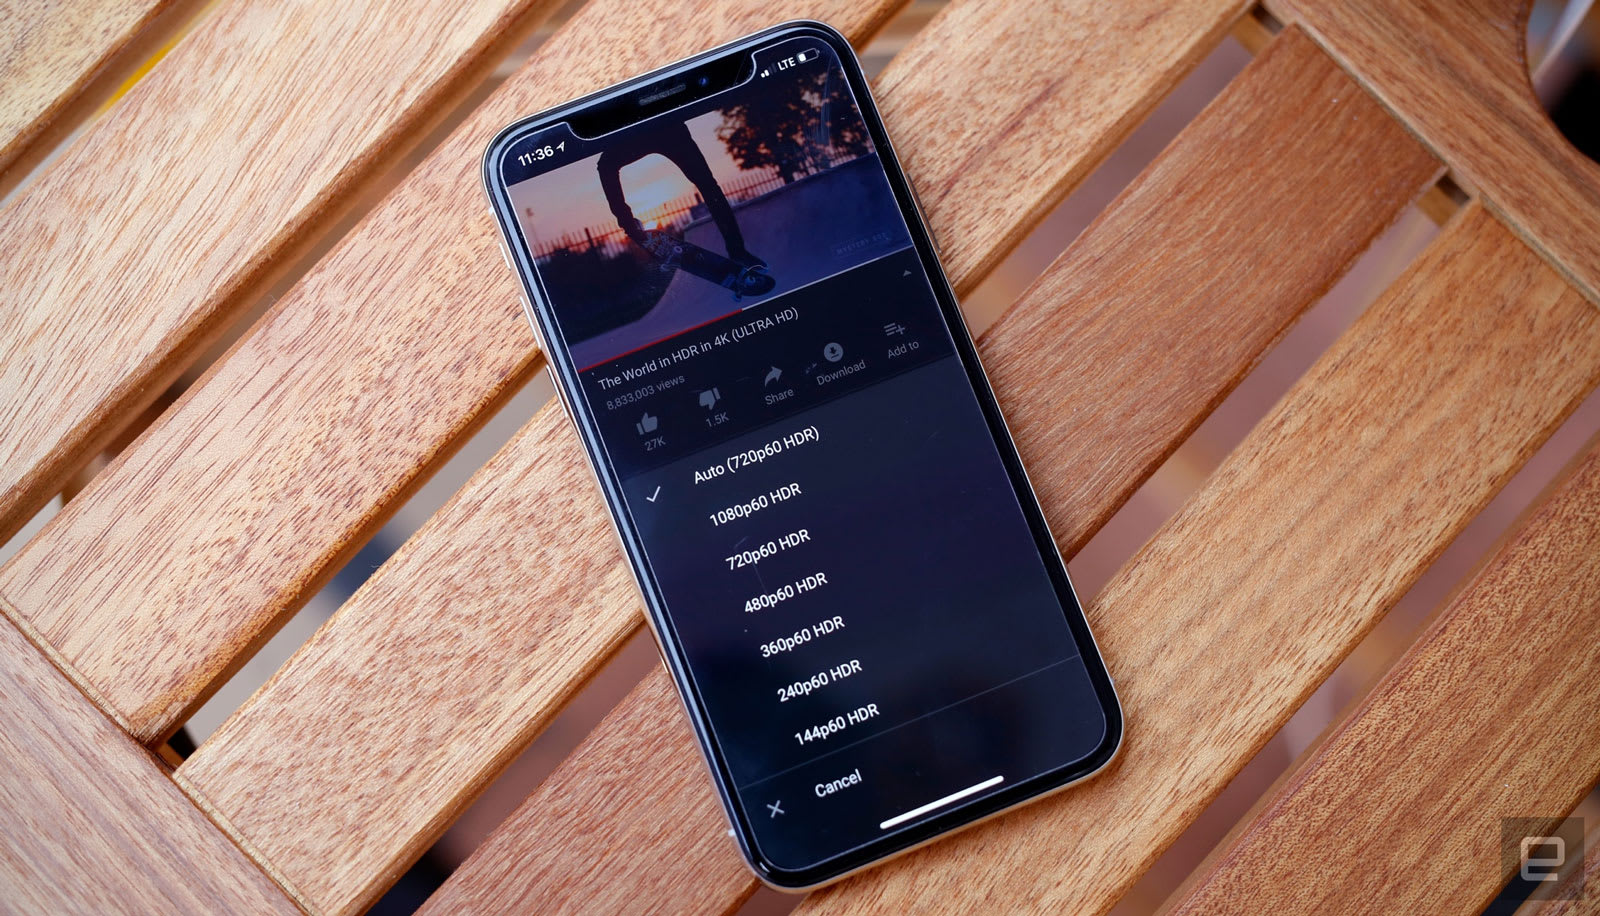 iPhone X is the latest device to stream YouTube HDR video